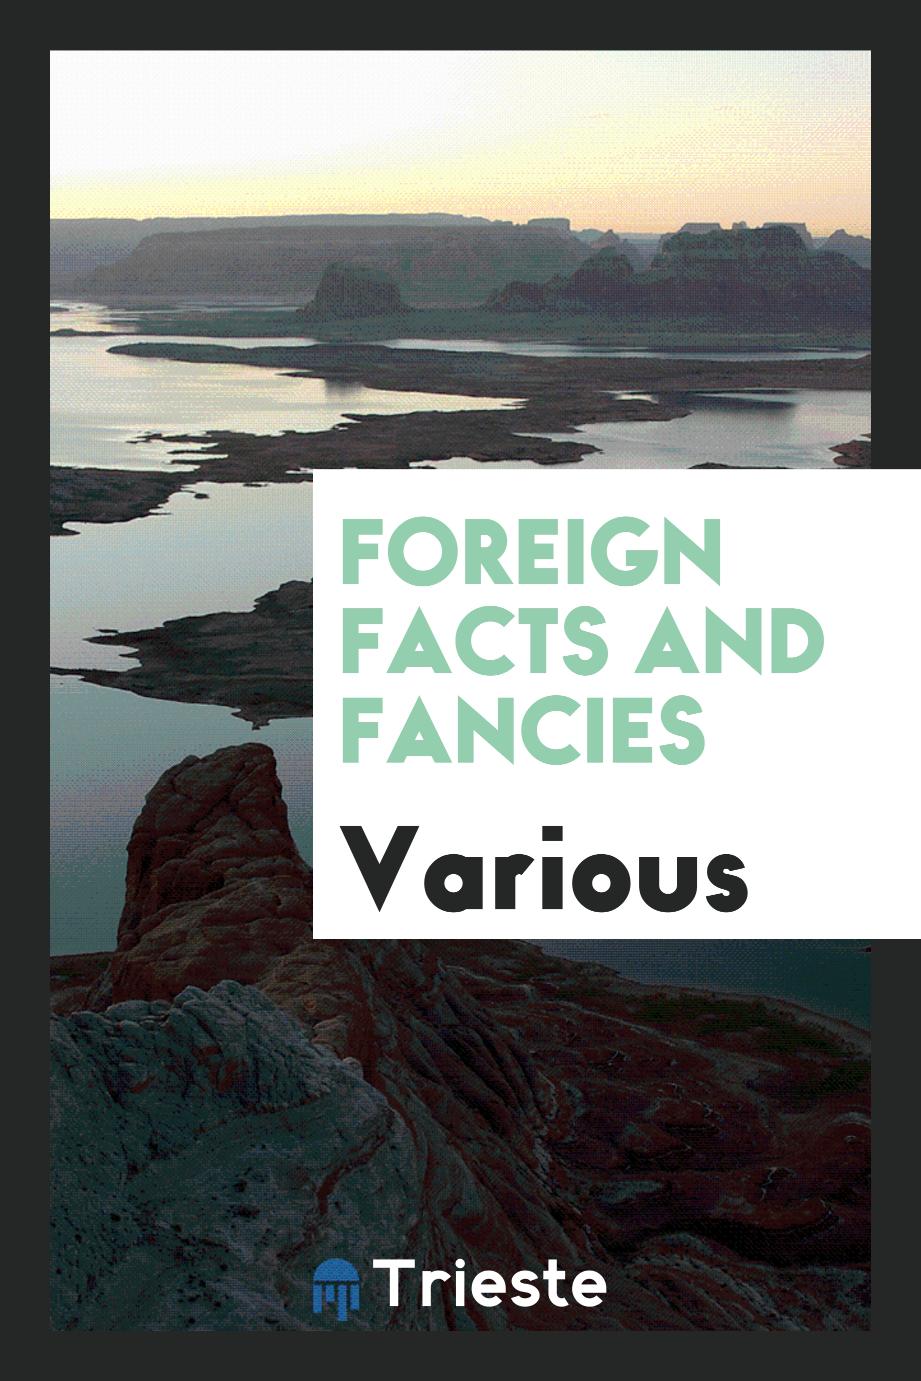 Foreign facts and fancies